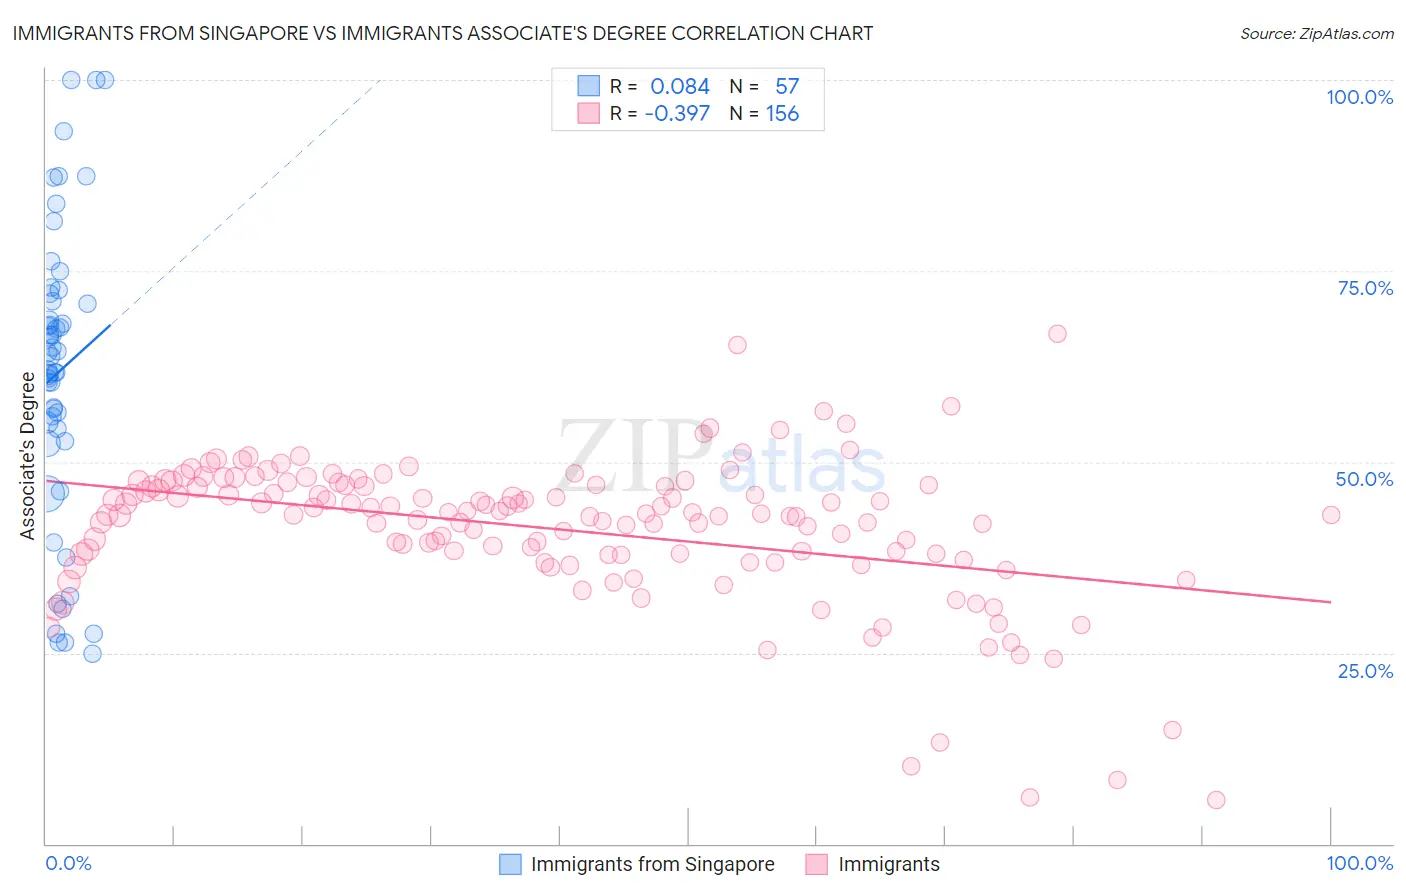 Immigrants from Singapore vs Immigrants Associate's Degree